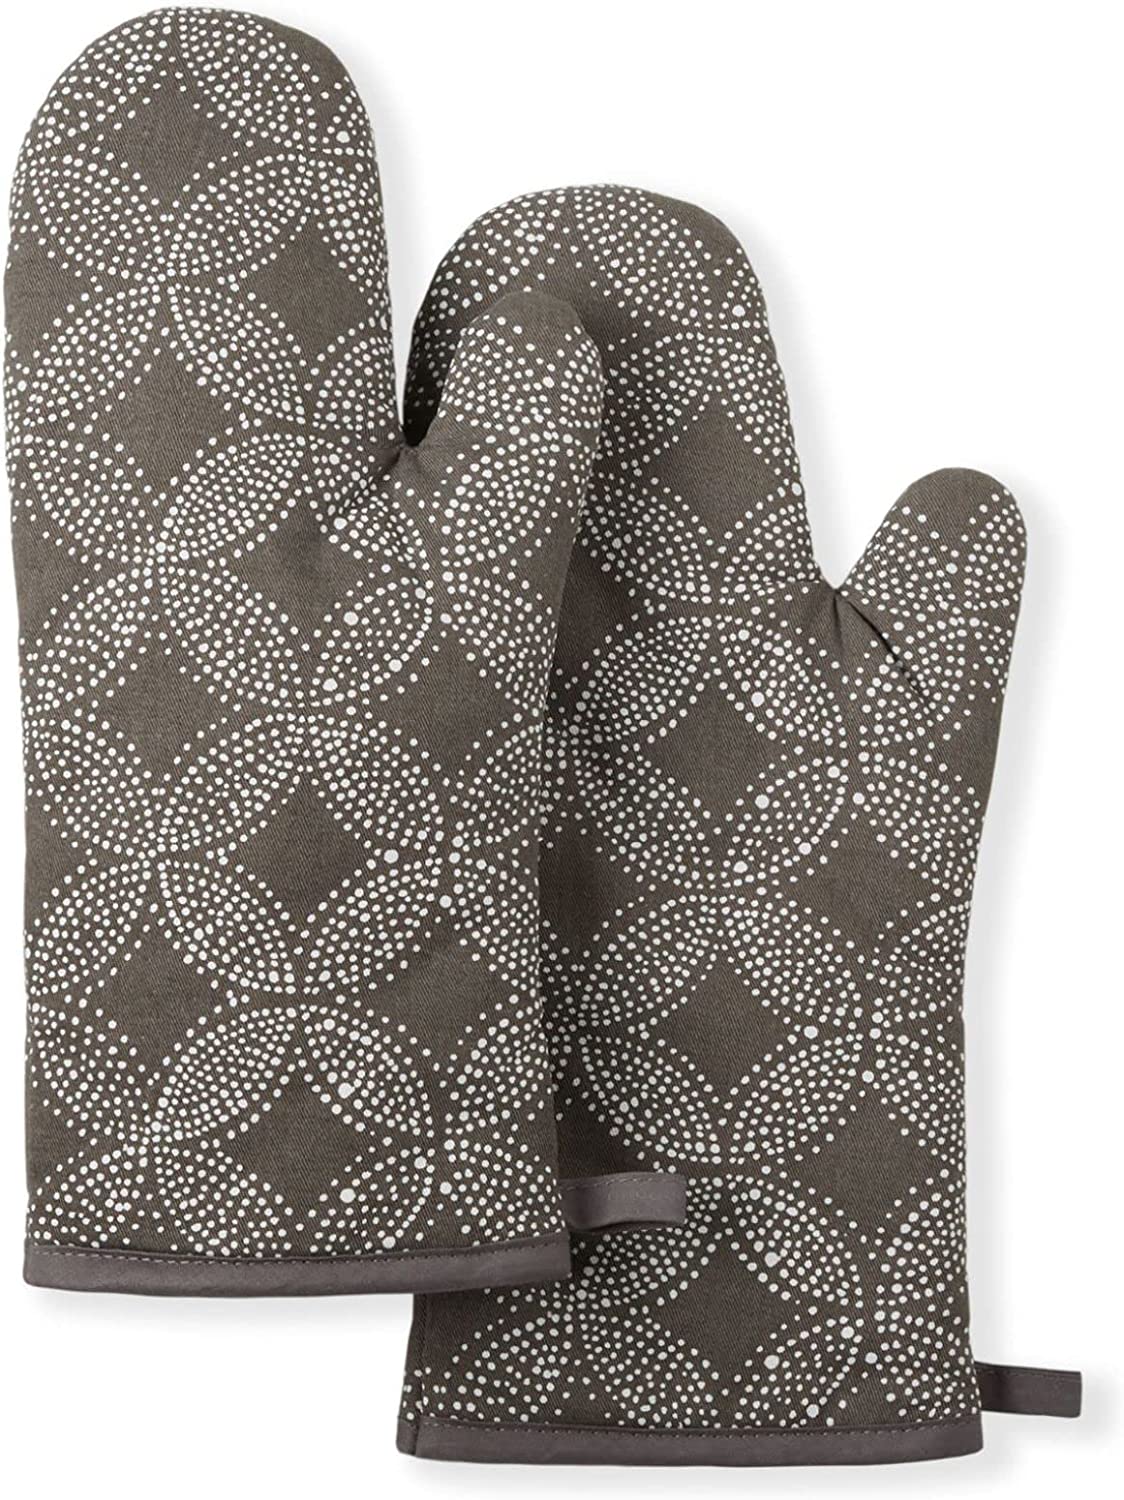 2-Piece Tommy Bahama Oven Mitt Sets (Various) $8.75 + Free S&H w/ Prime or $25+